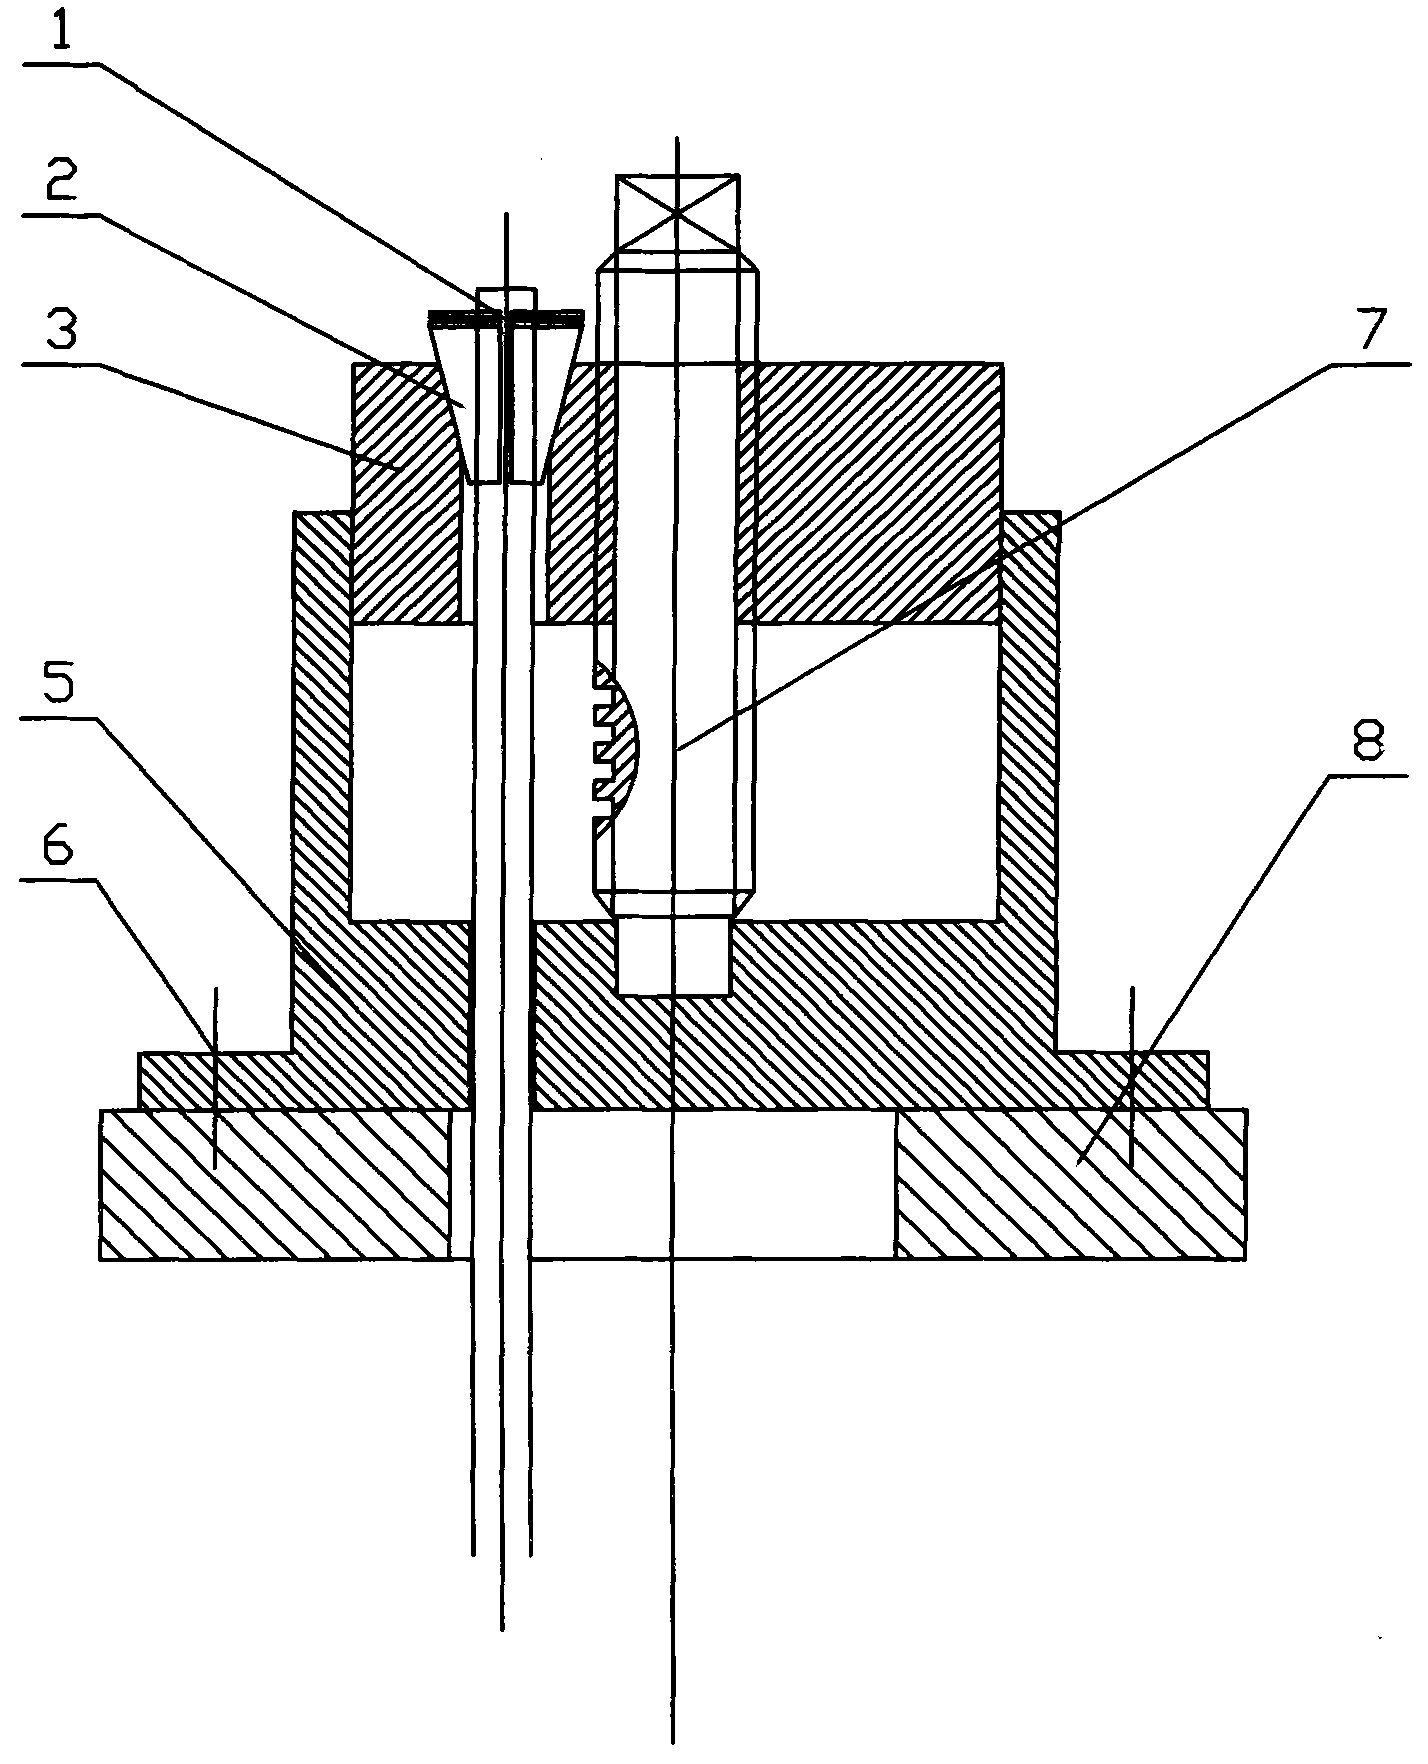 Adjustable prestressed anchoring device